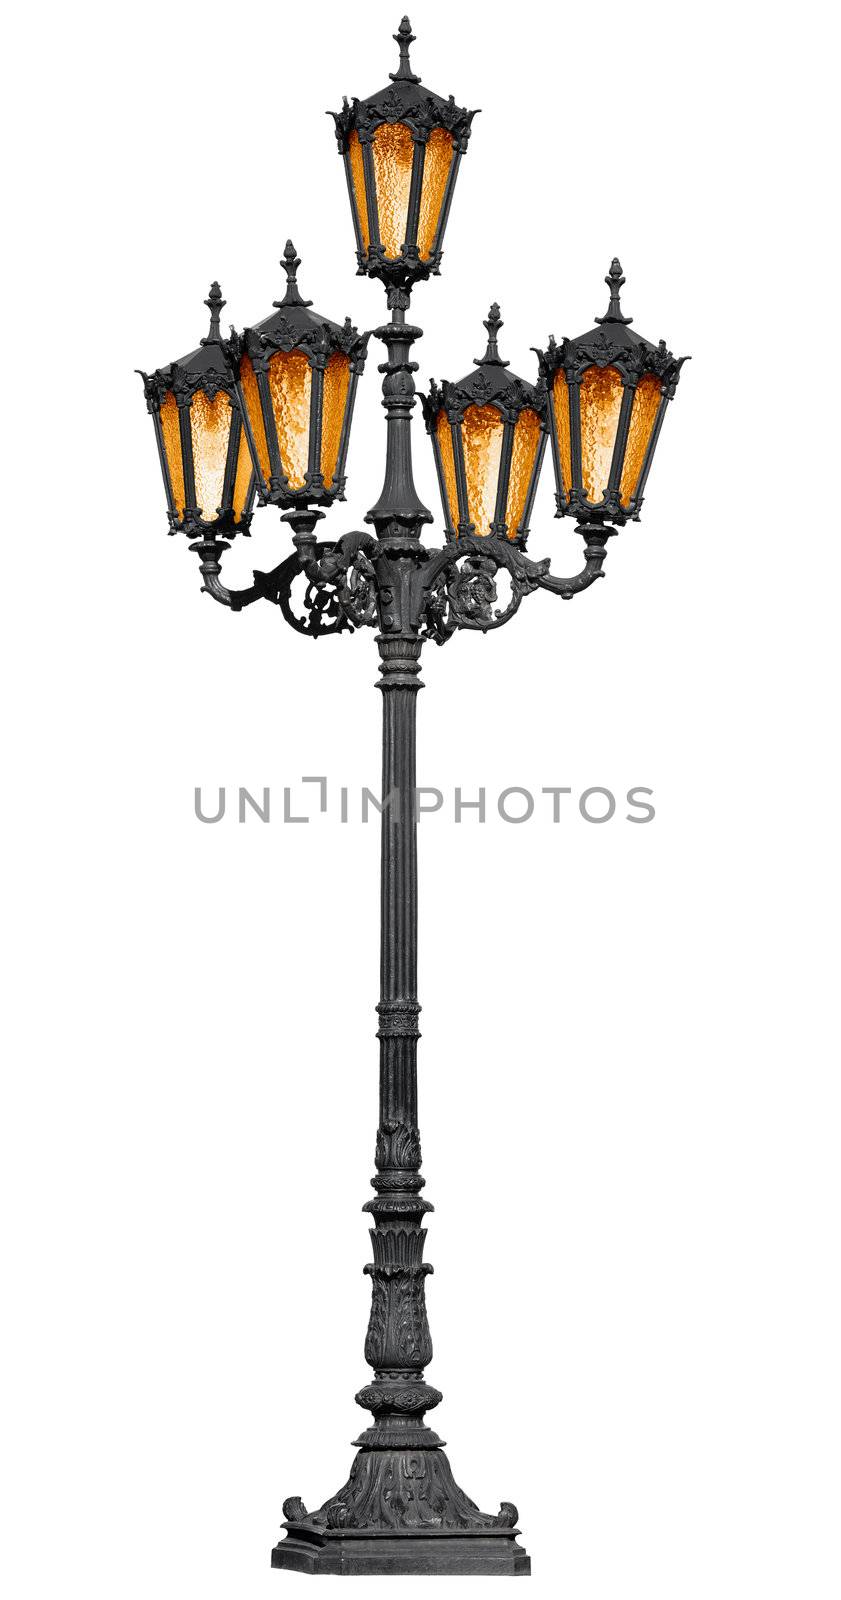 Antique lamp post on white by pzaxe